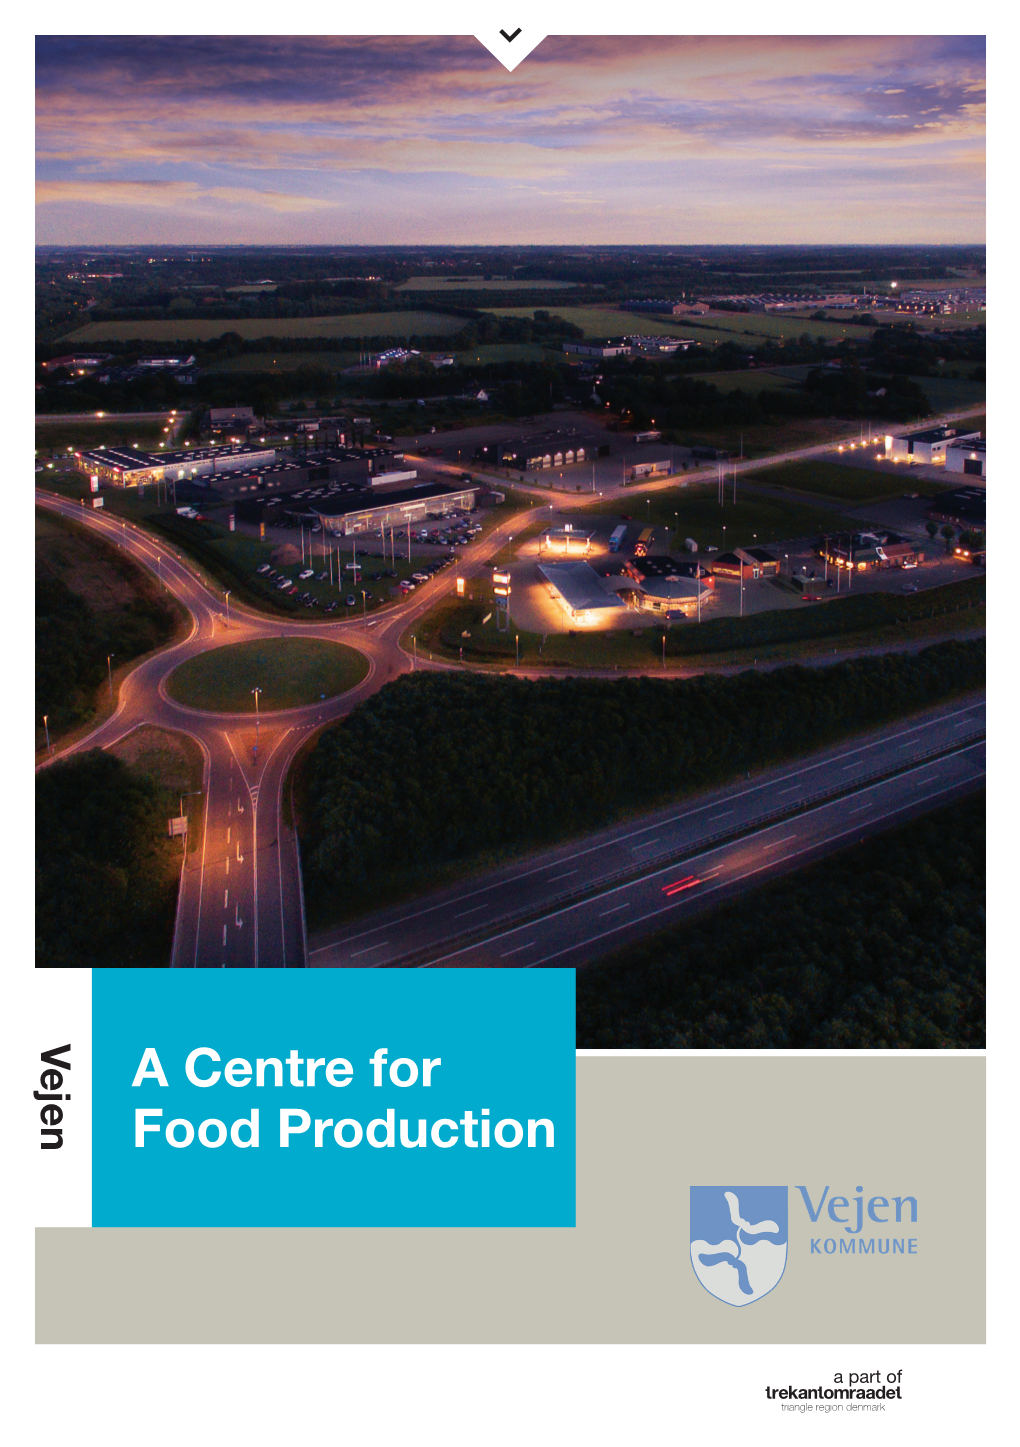 A Centre for Food Production